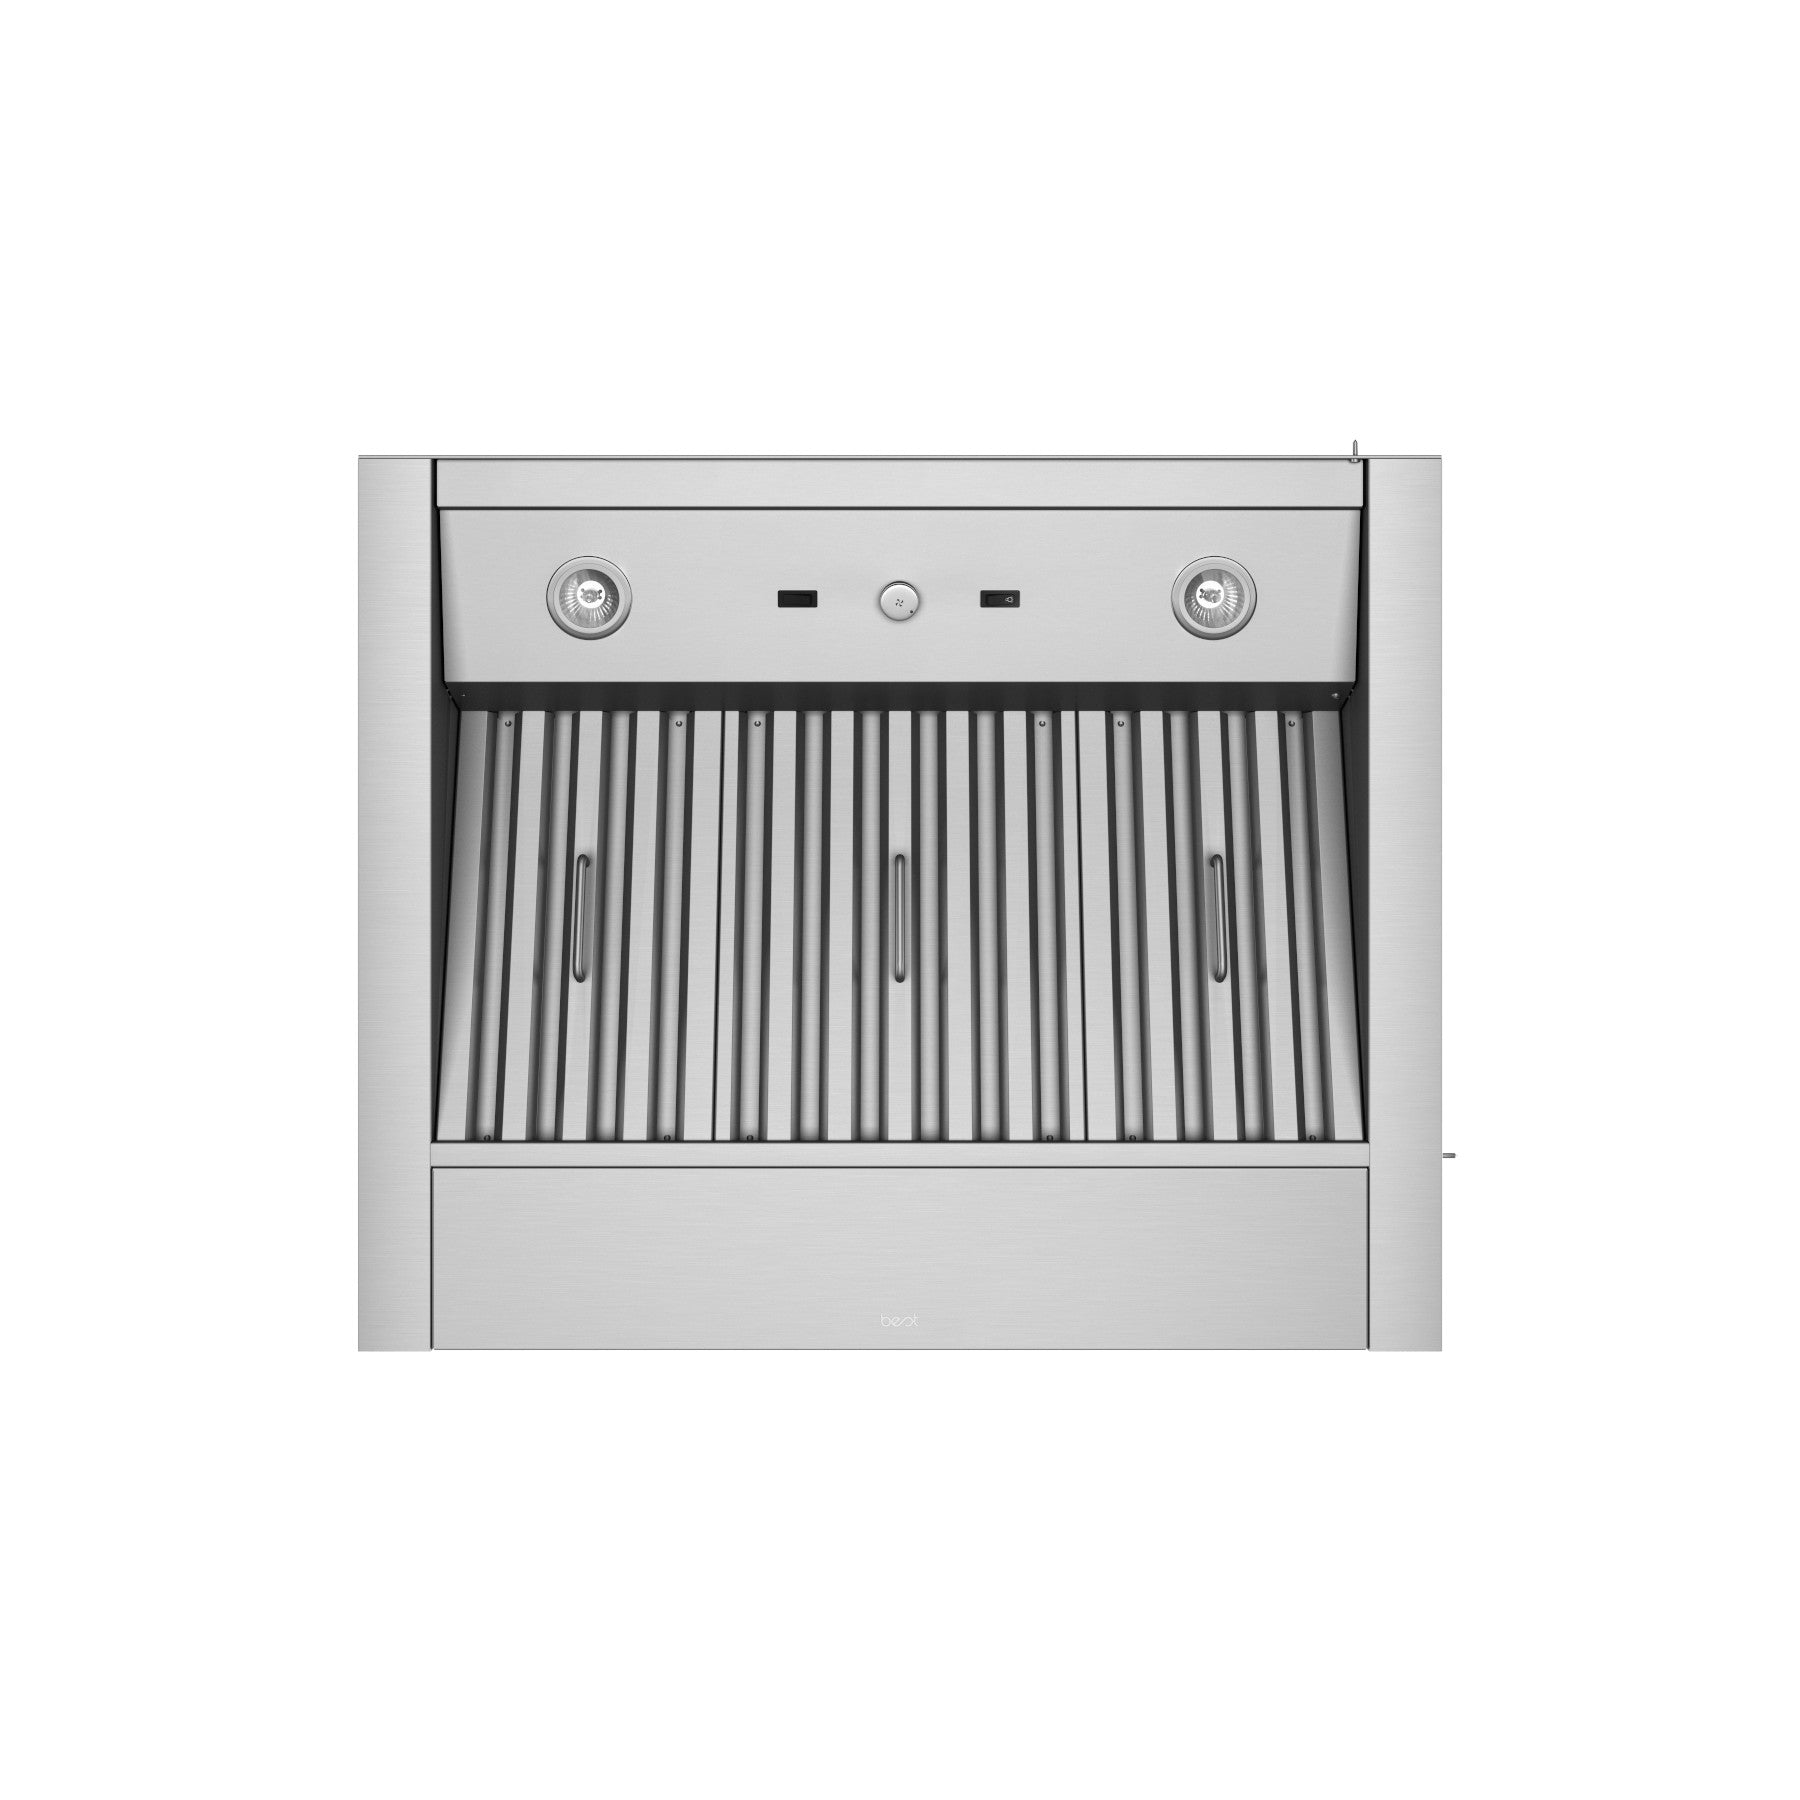 Best - 40.38 Inch Outdoor Range Hood Insert Vent in Stainless - CPD9M423SB